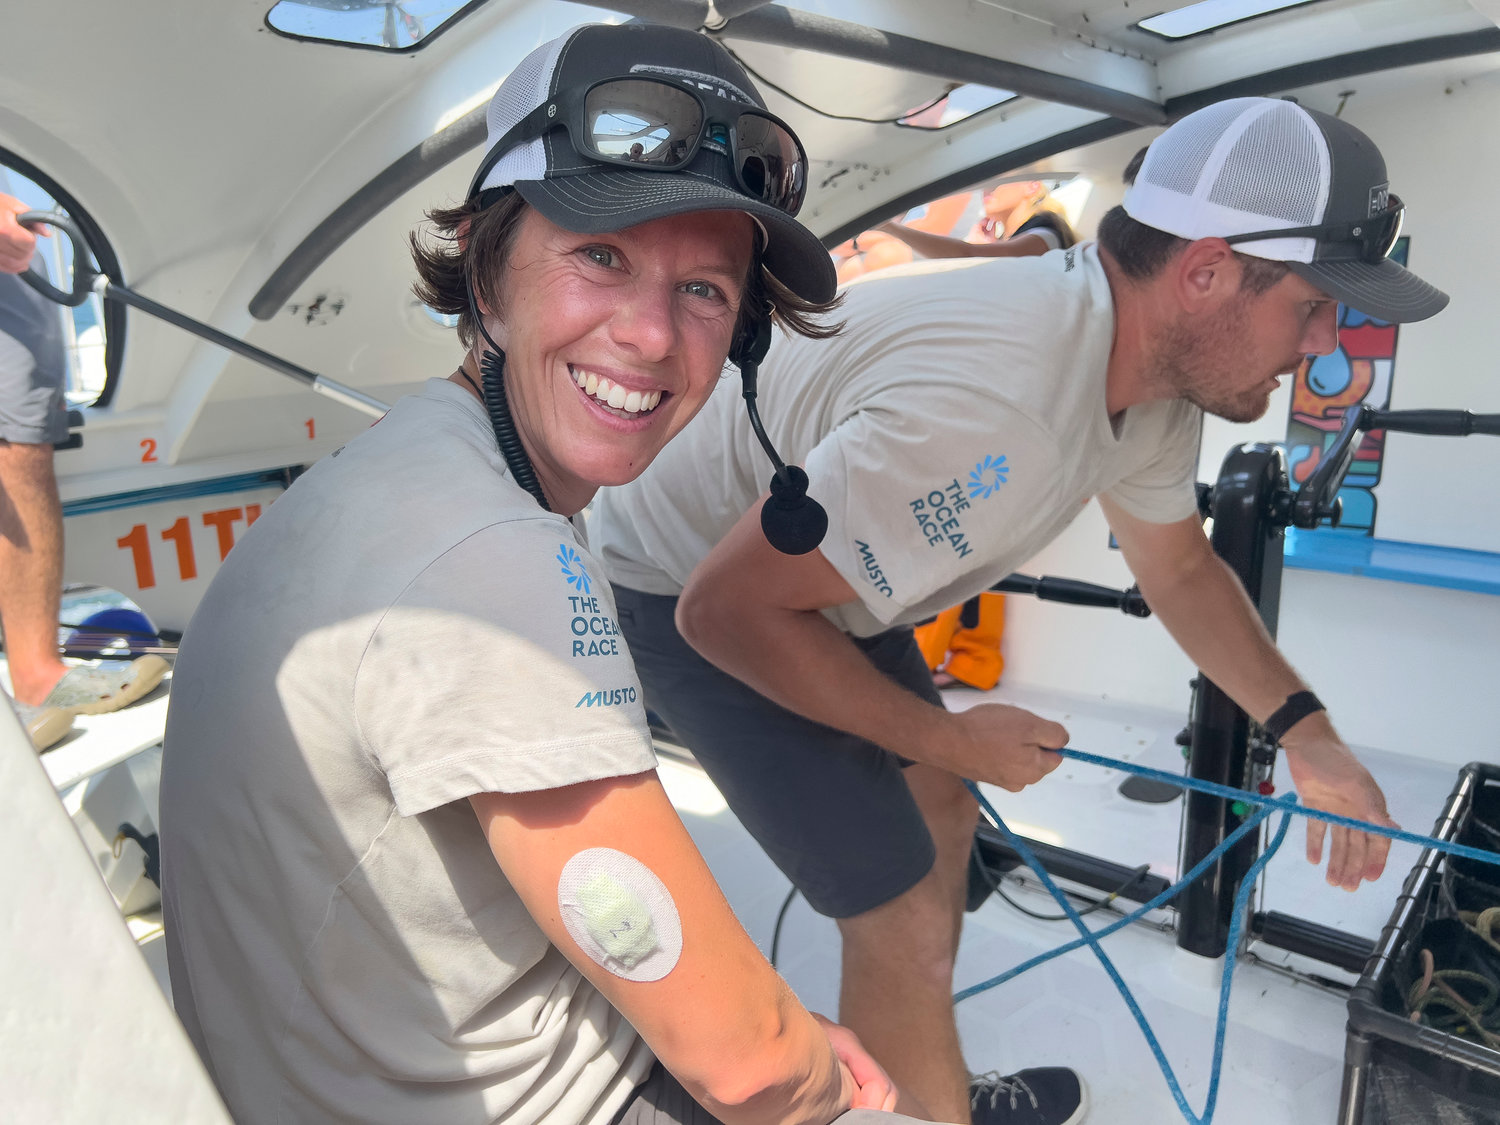 Italian sailor Francesca Clapcich, the team’s trimmer, shows off a patch on her arm to monitor sleeping while aboard the ship.